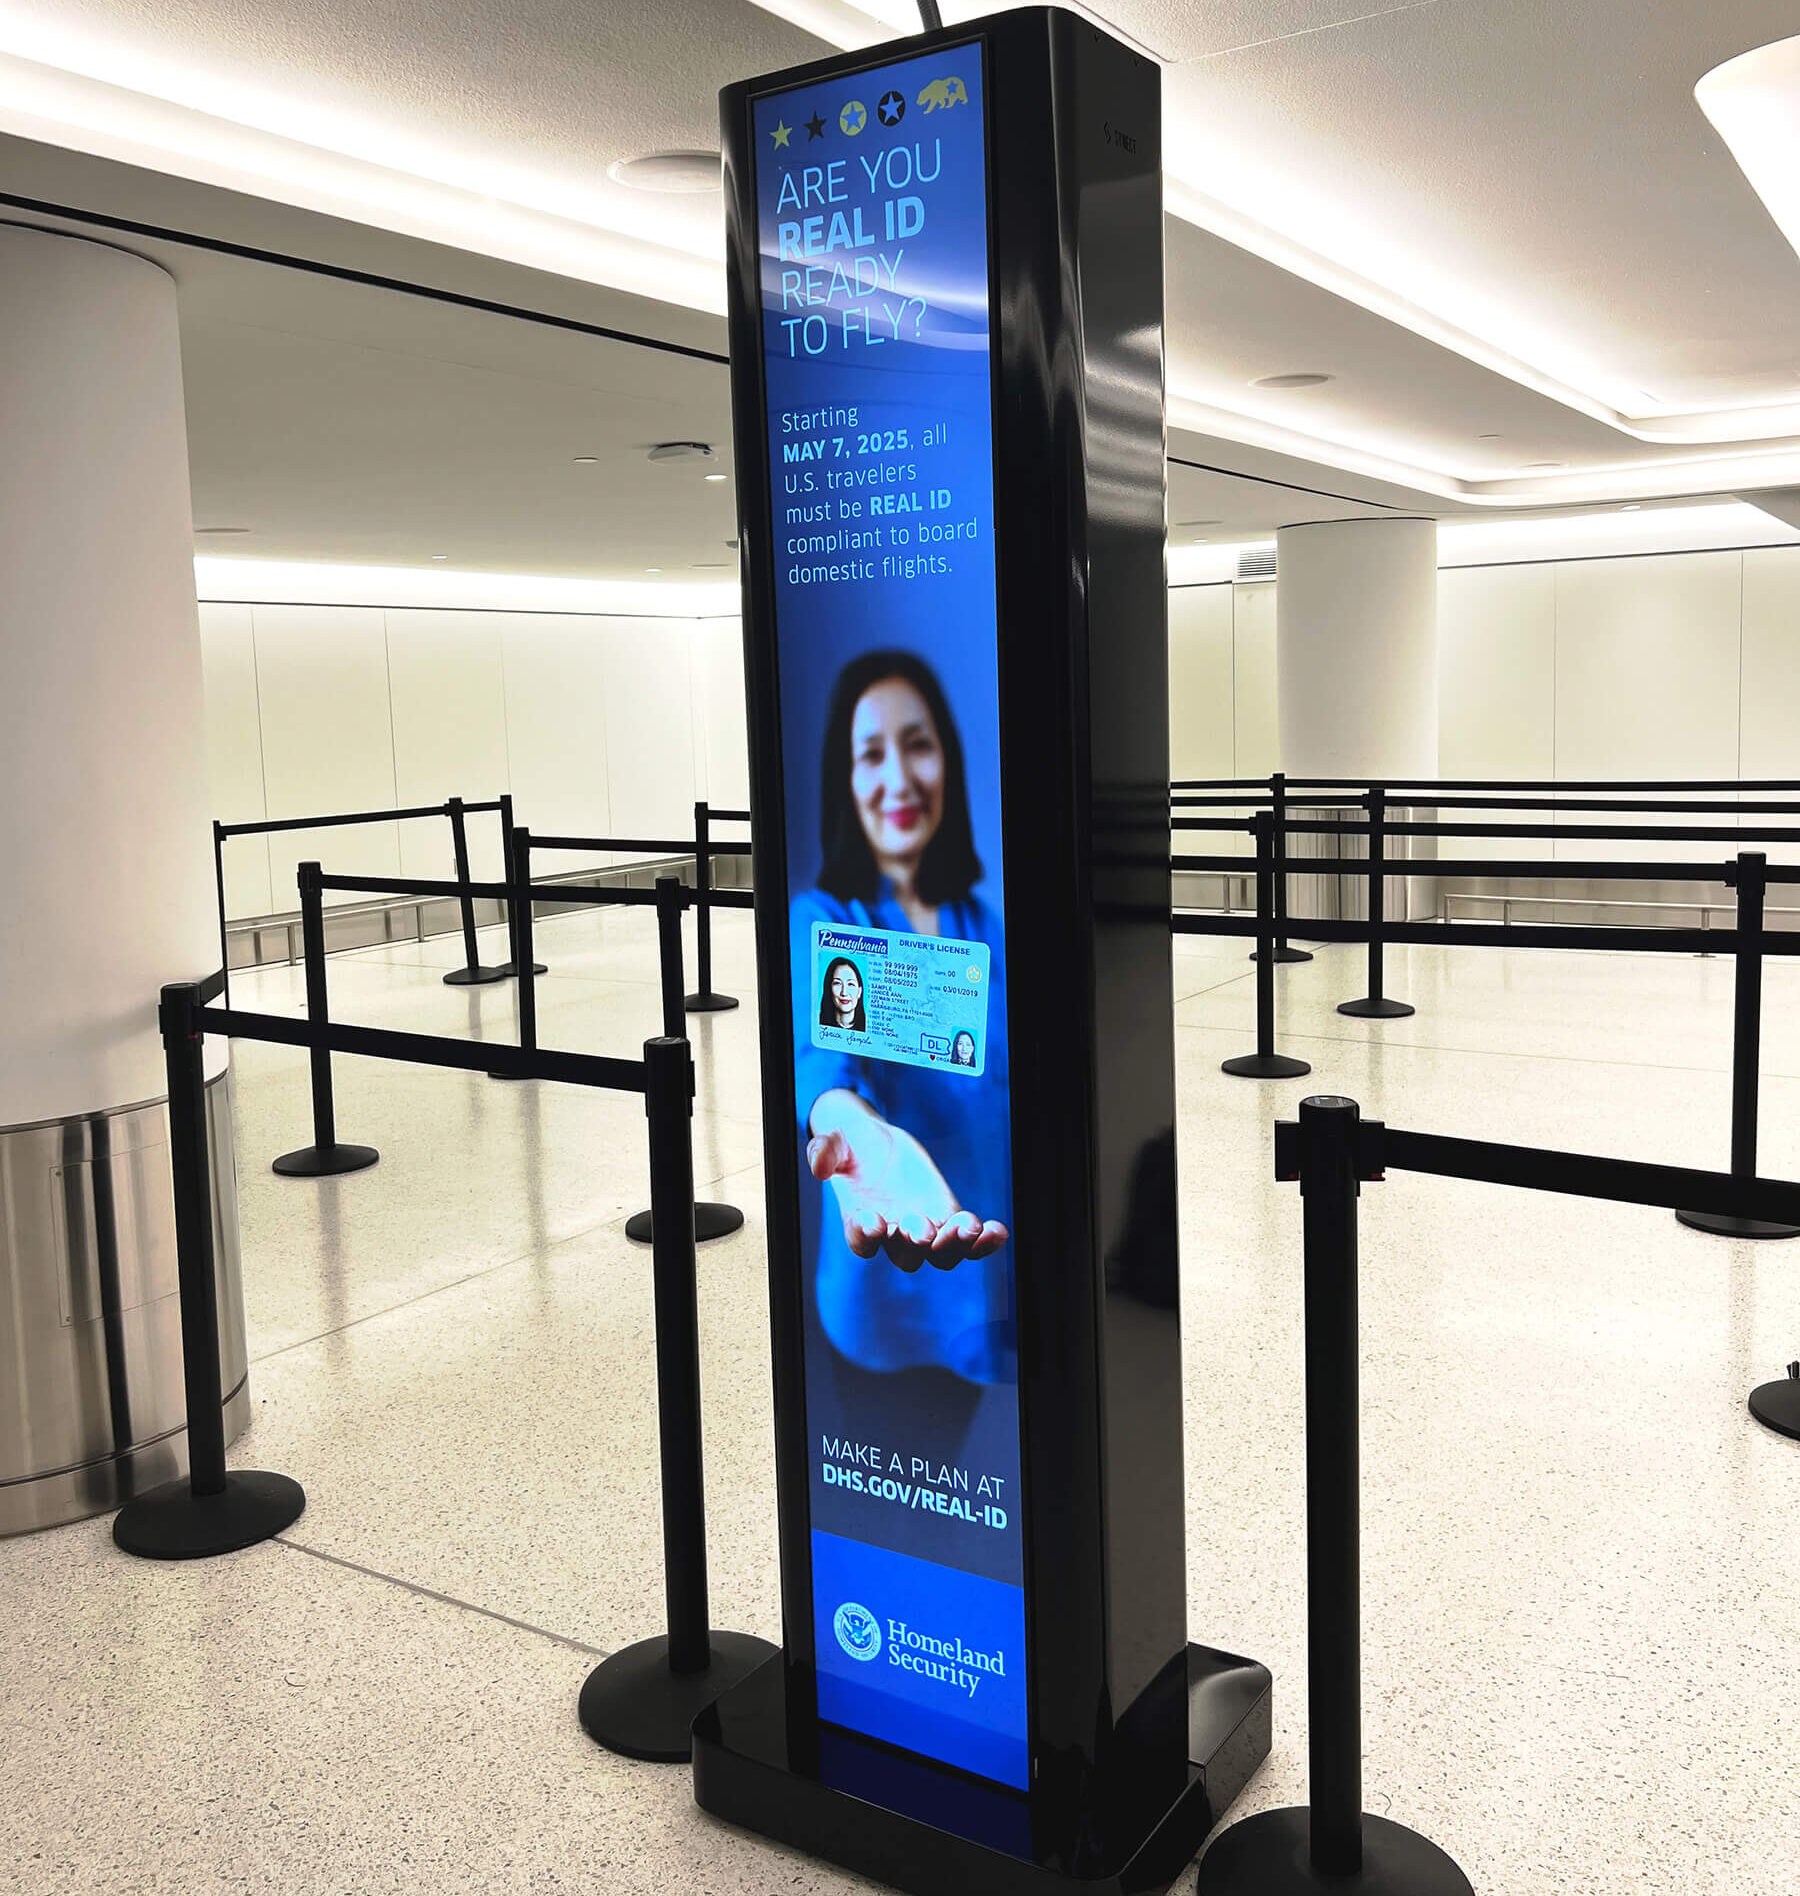 ReadySeeGo totems contribute to a more engaging, efficient and automated security checkpoint